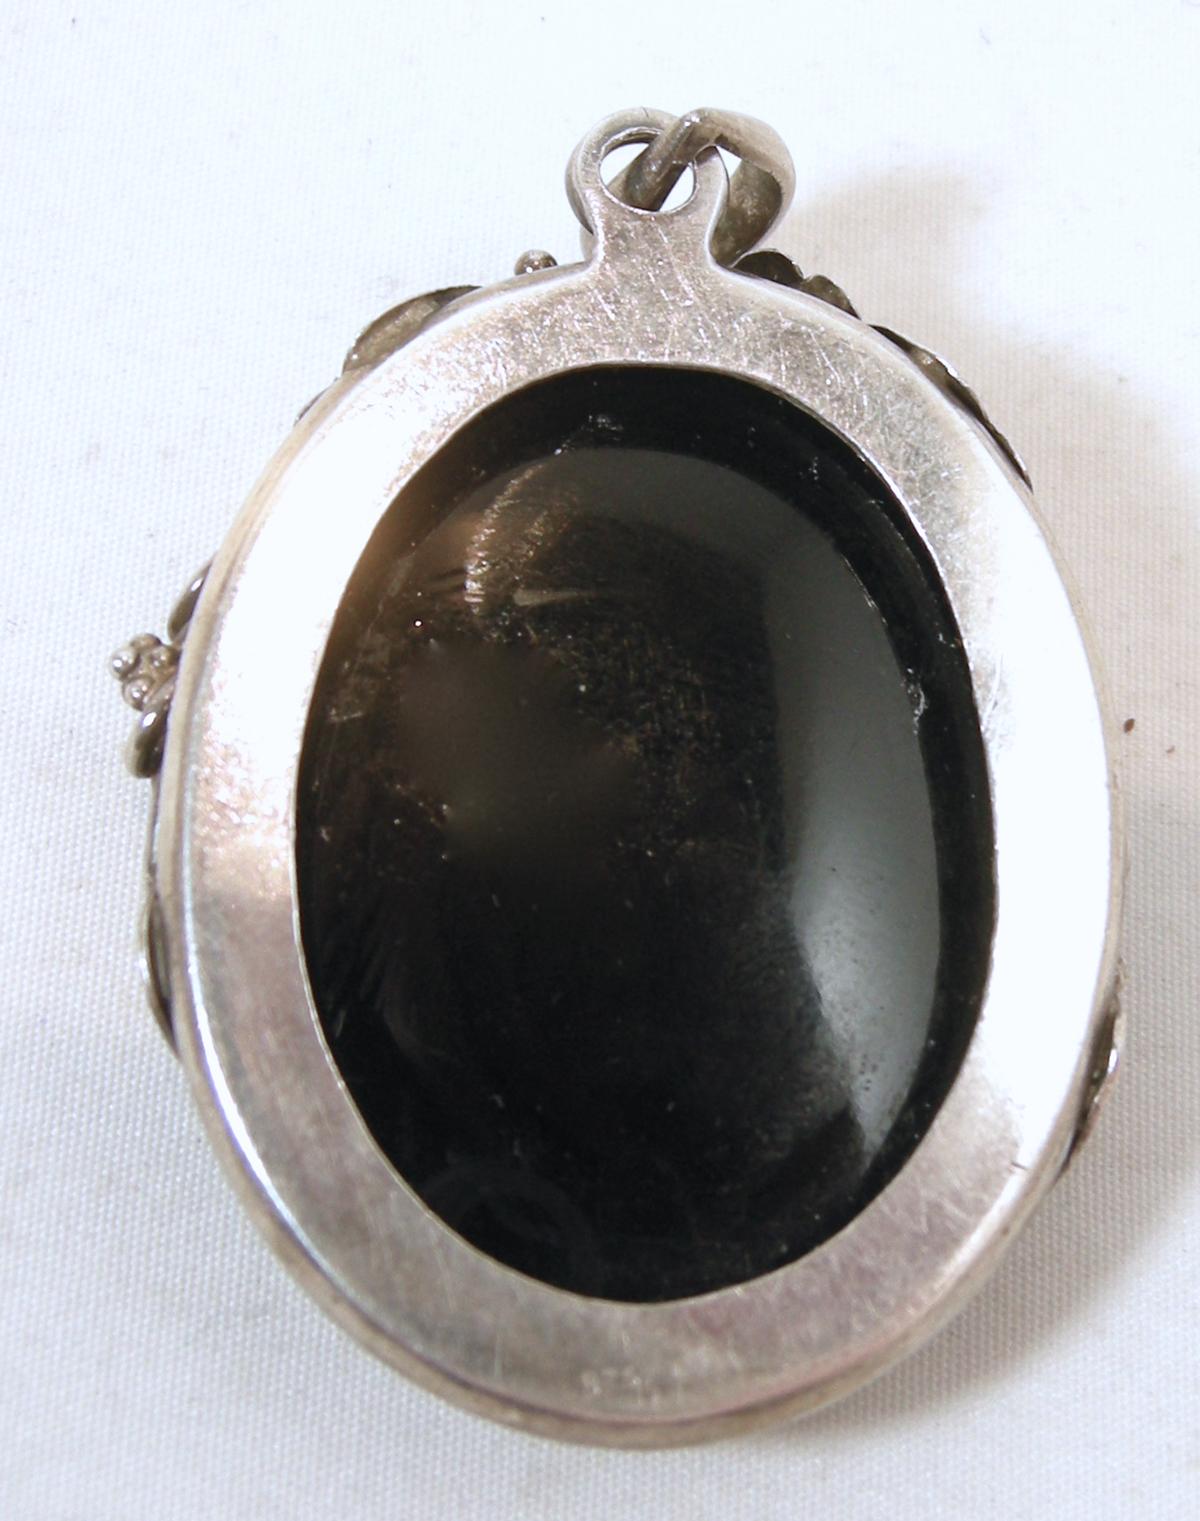 This vintage 1930’s pendant features a large black glass with a butterfly intaglio in a 3-dimensional floral design sterling silver setting.  In excellent condition, this pendant measures 2-1/8” x 1-3/8”.